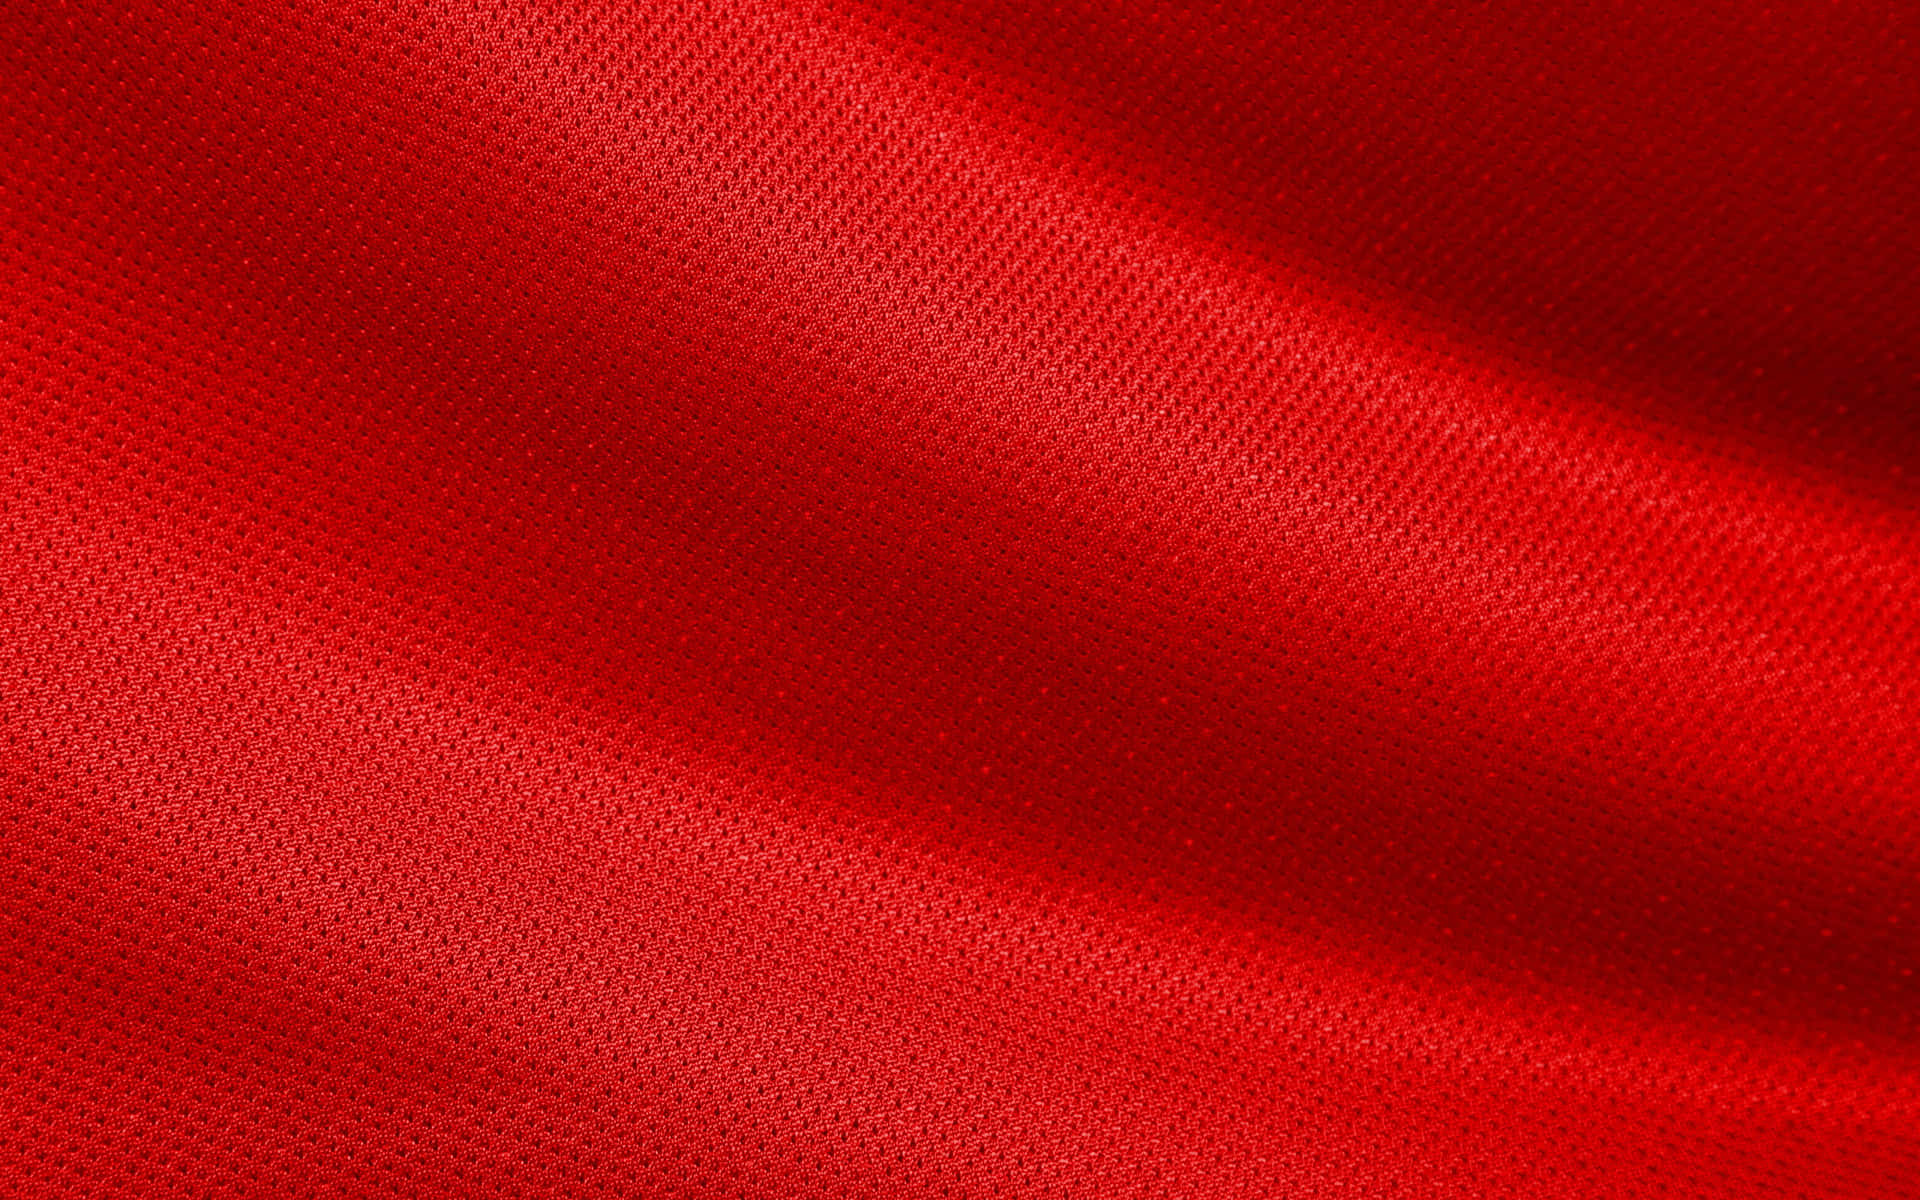 Red Fabric Background With A Smooth Texture